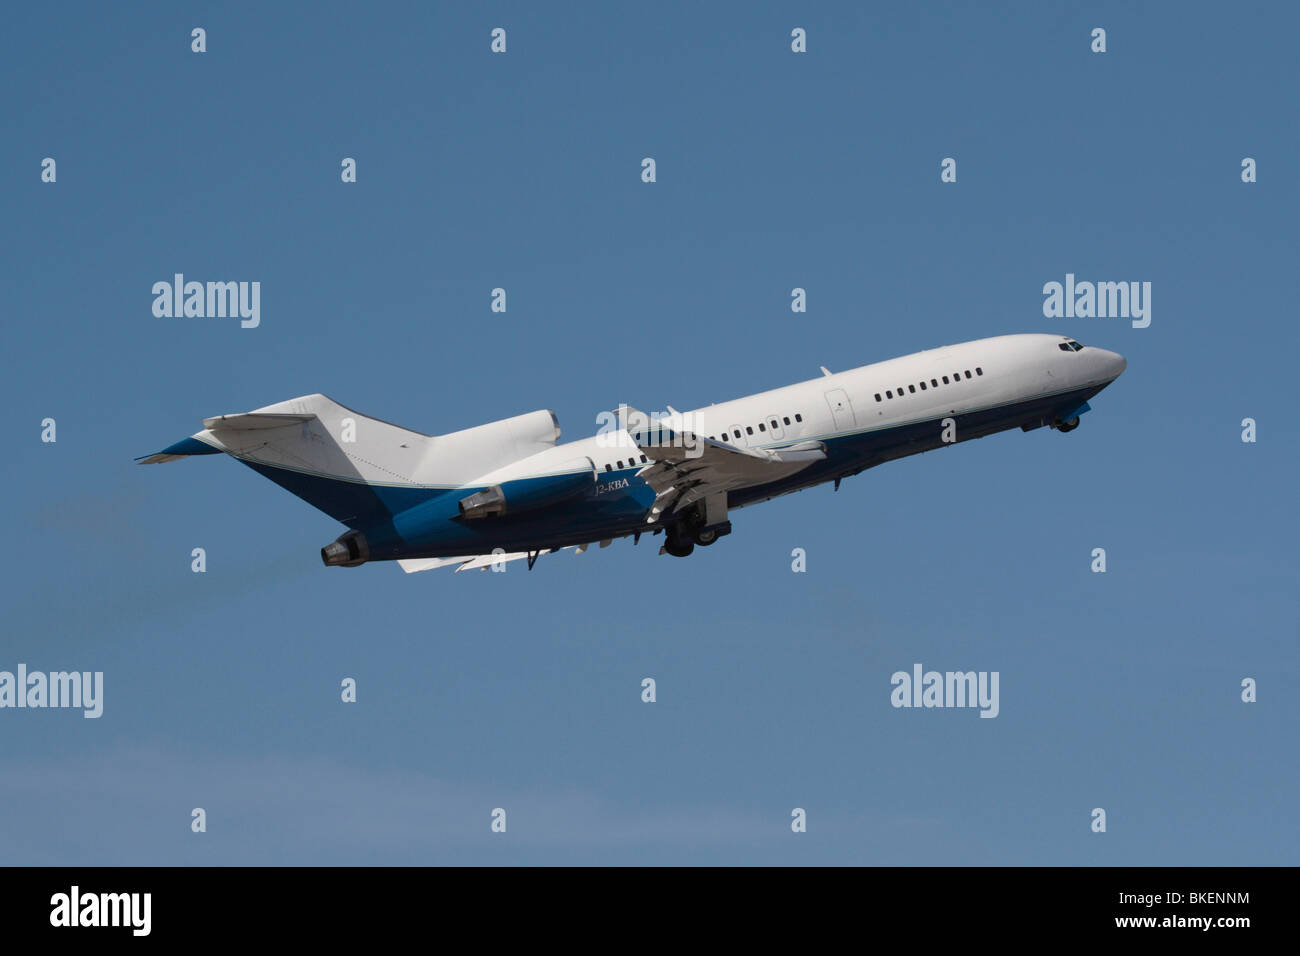 Boeing 727 commercial passenger jet plane flying in the air on takeoff against a blue sky Stock Photo